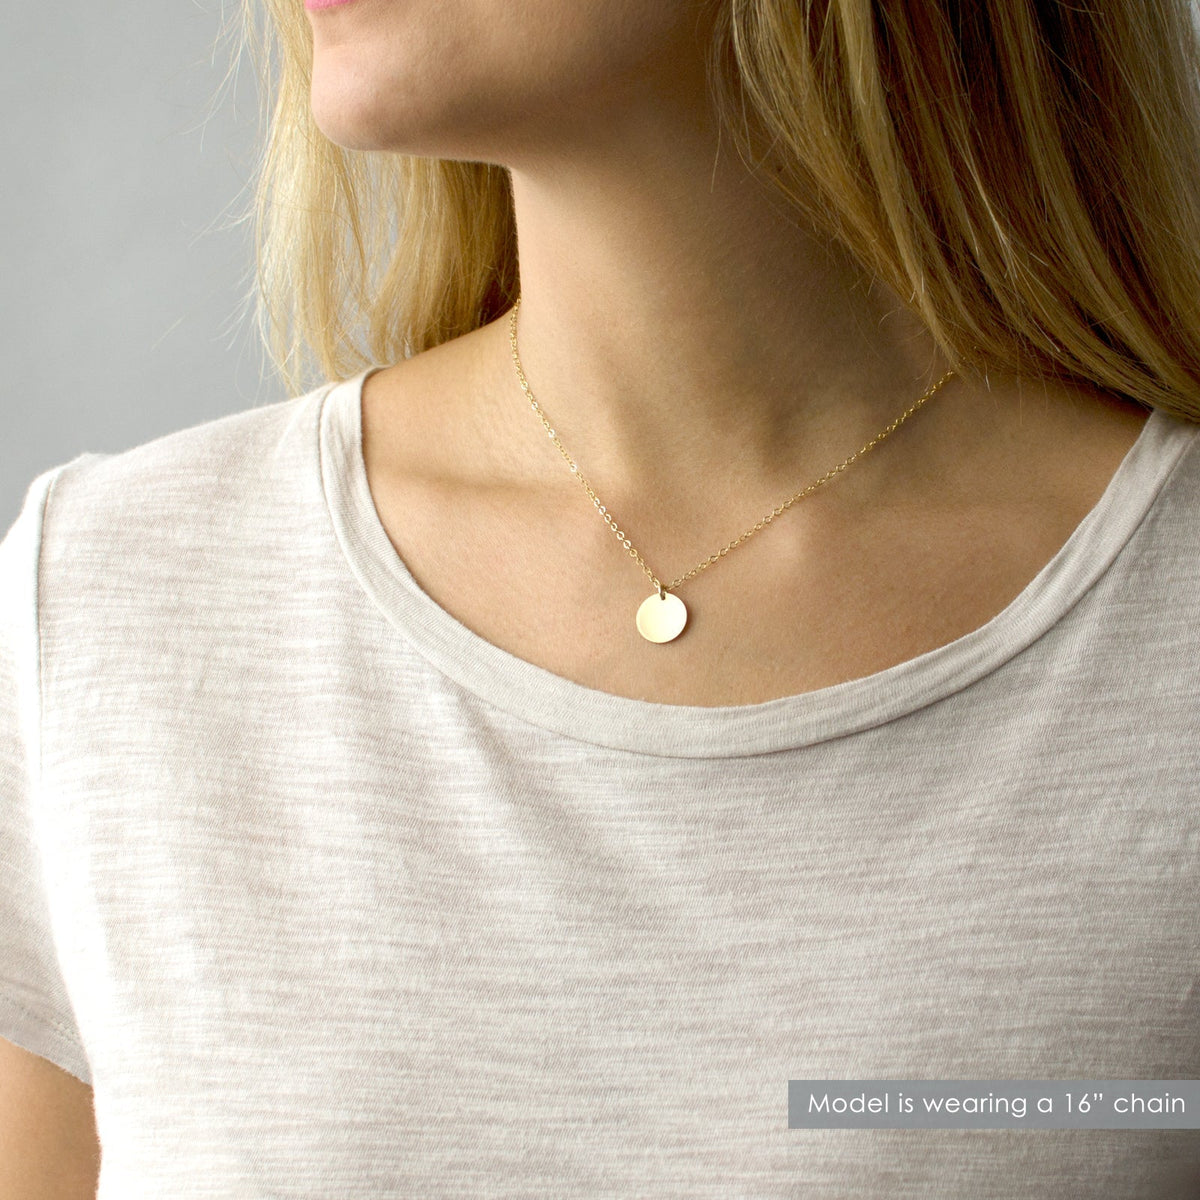 Heartbeat Disc Necklace